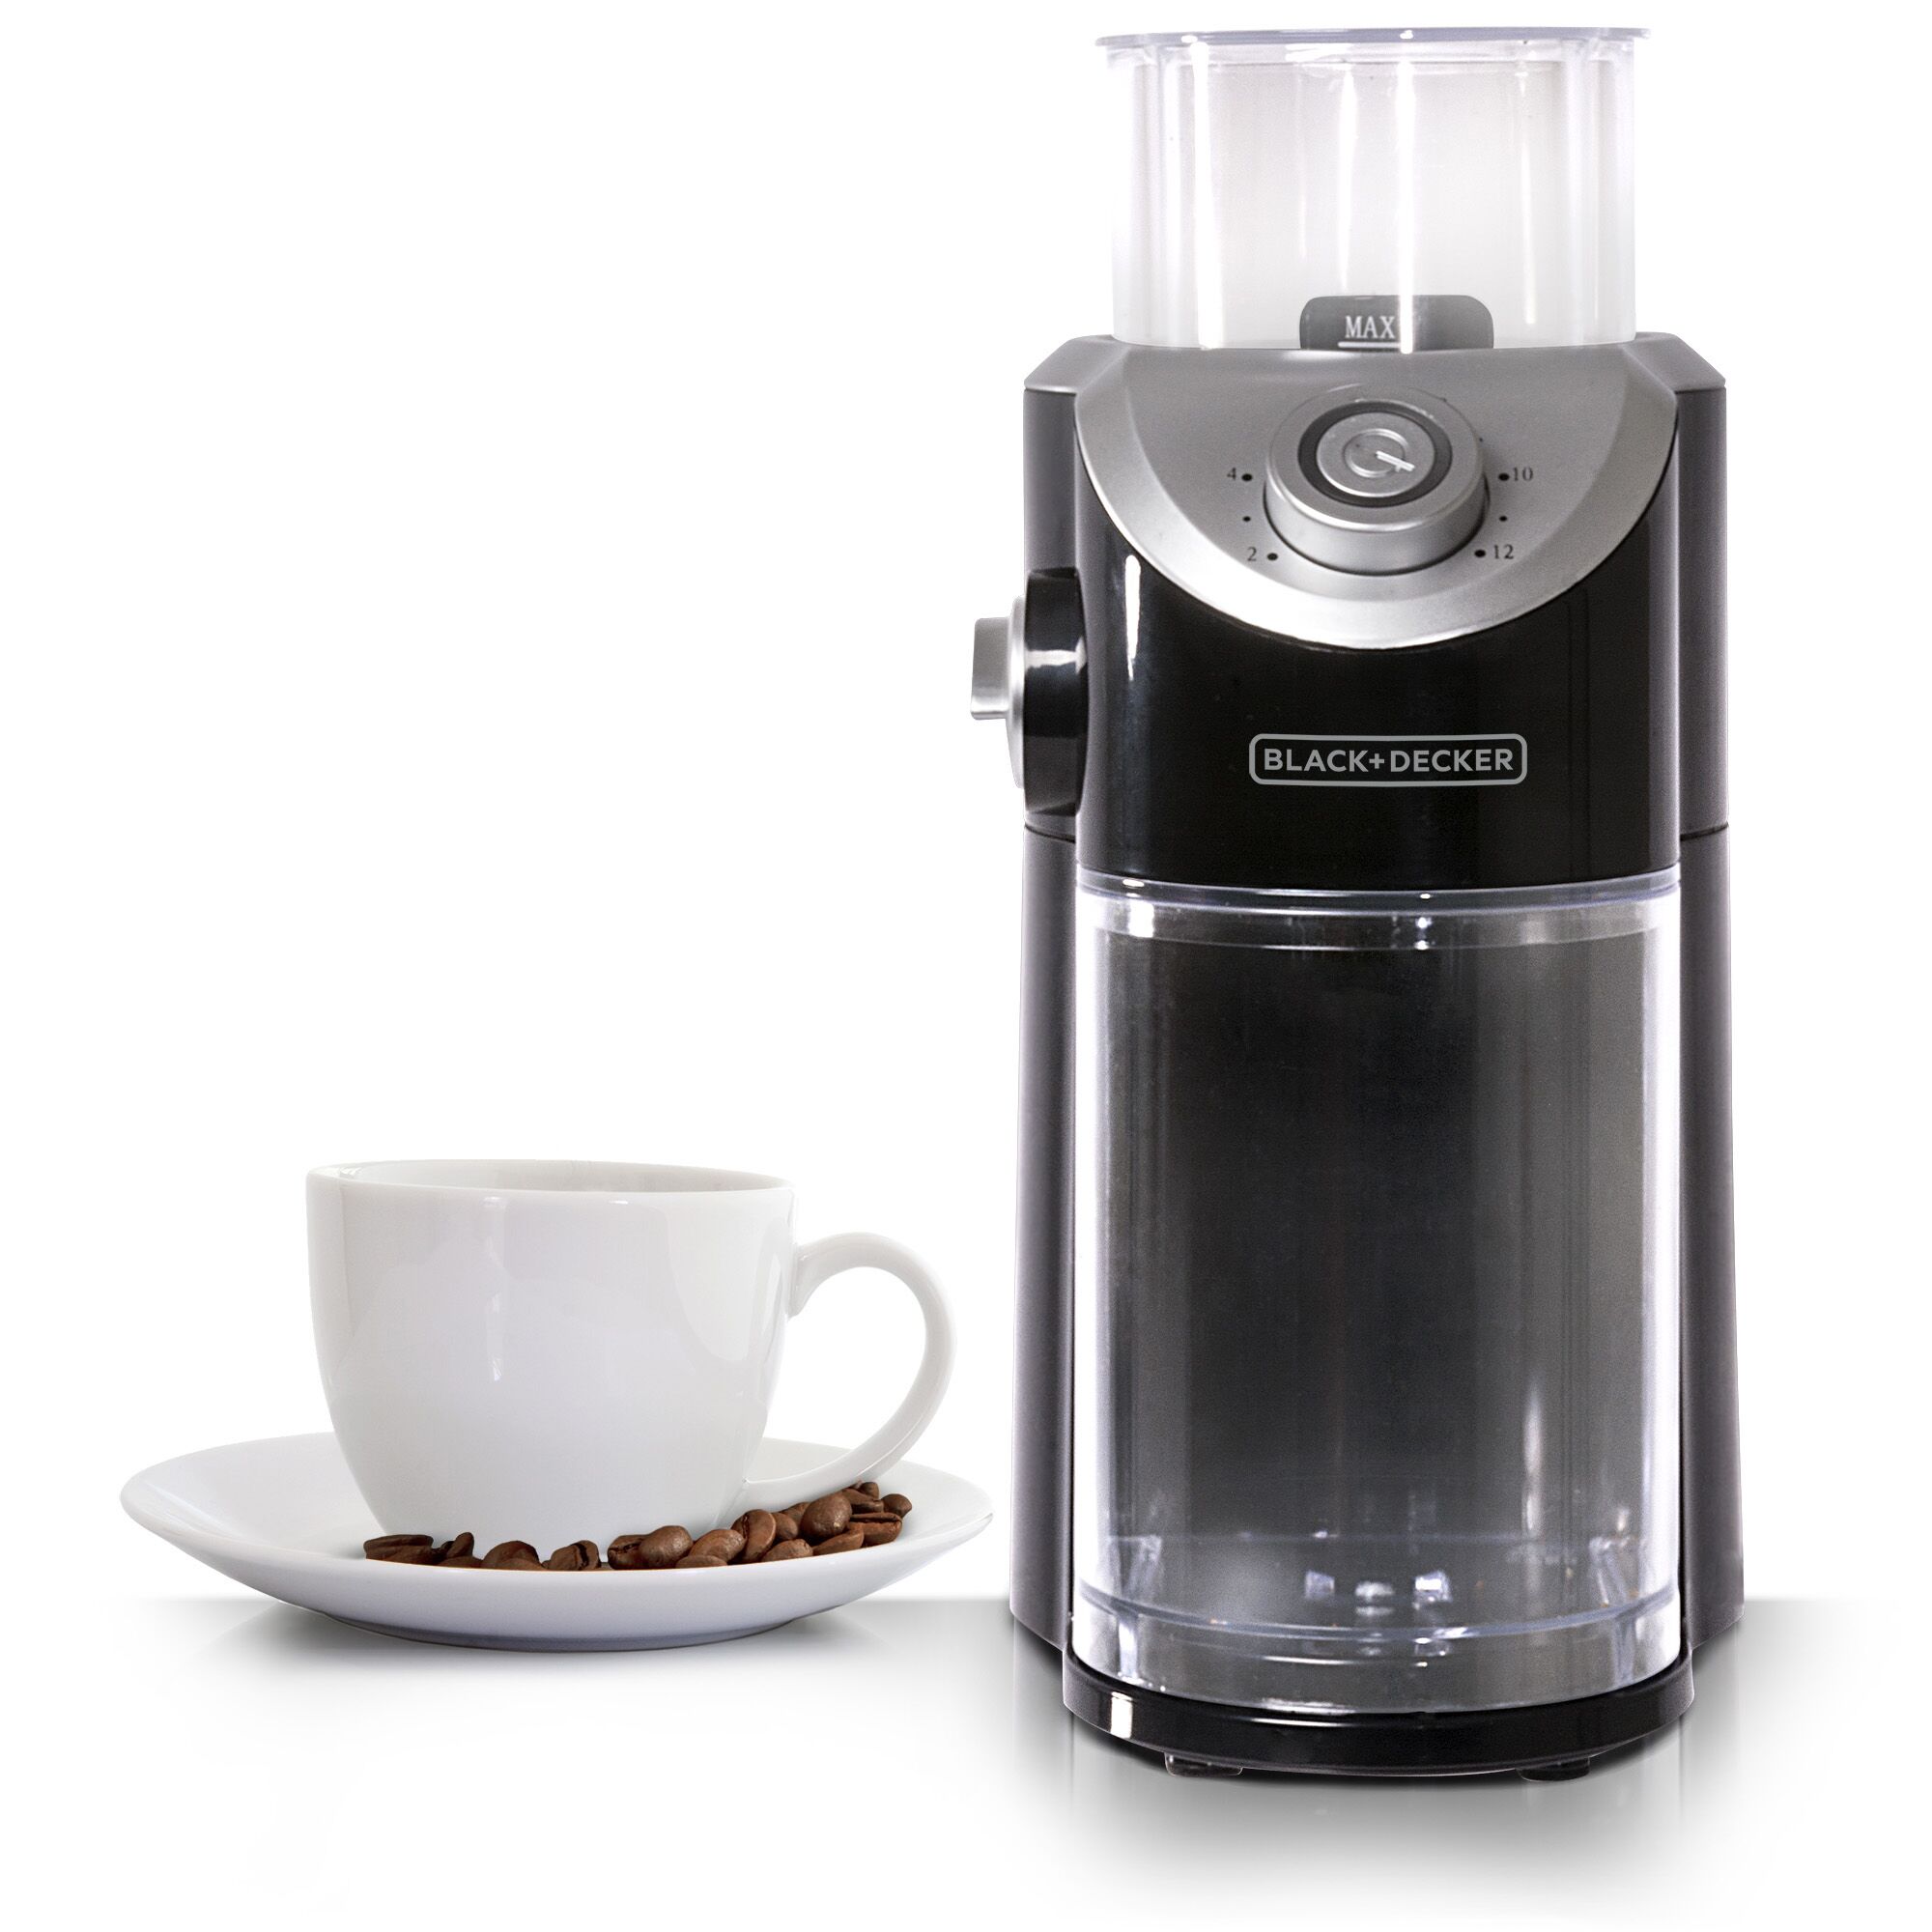 Profile of Burr Mill Coffee Grinder.